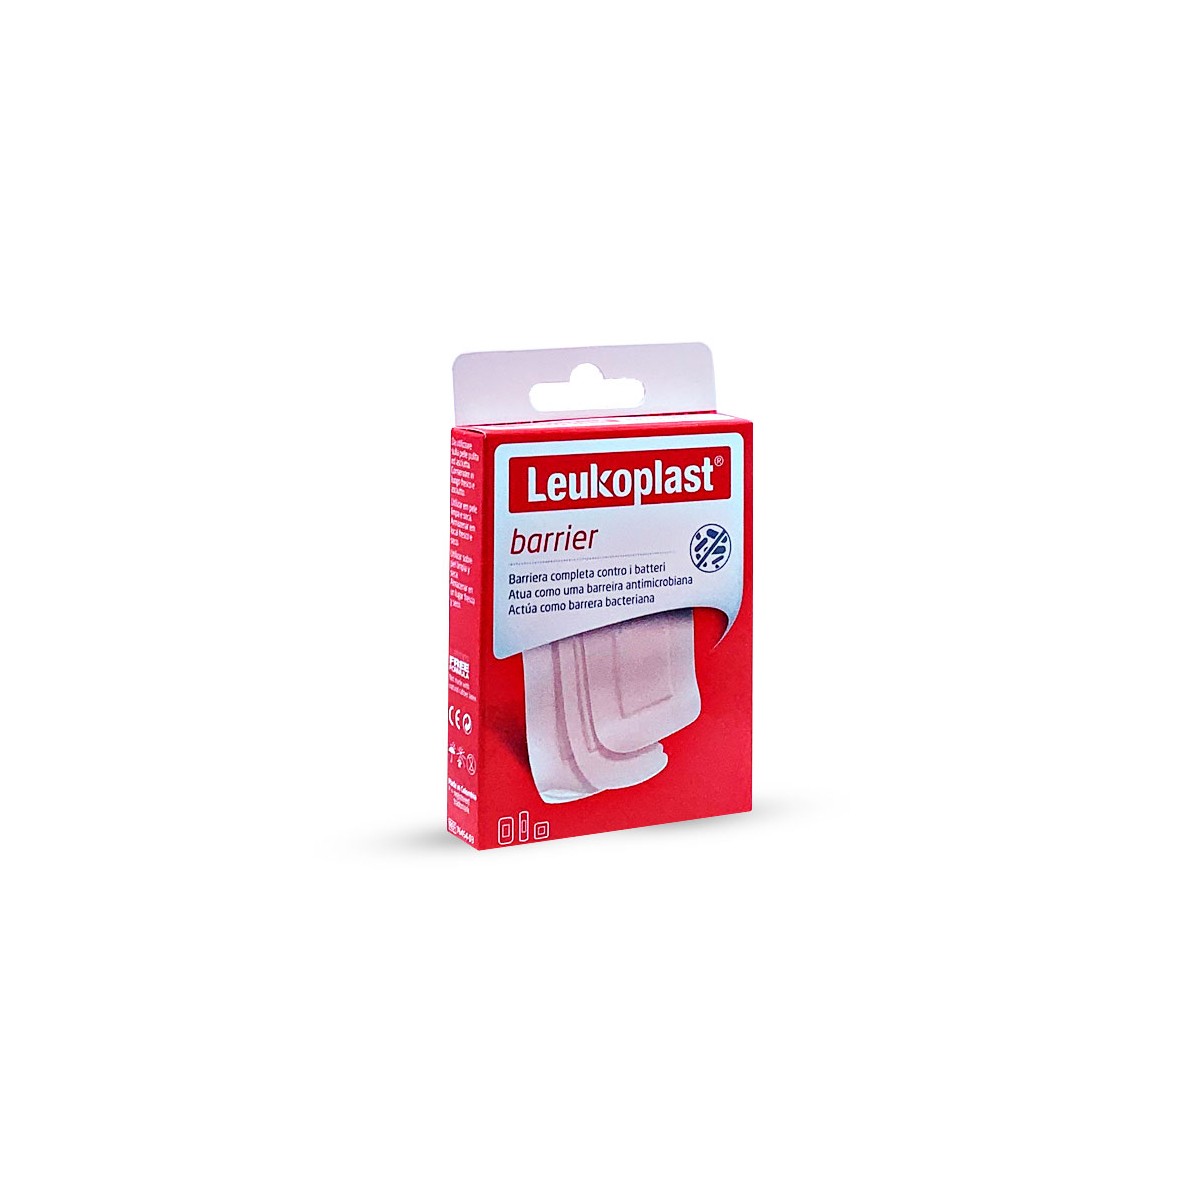 LEUKOPLAST BARRIER APOSITO IMPERMEABLE SURTIDO 20 UNIDADES